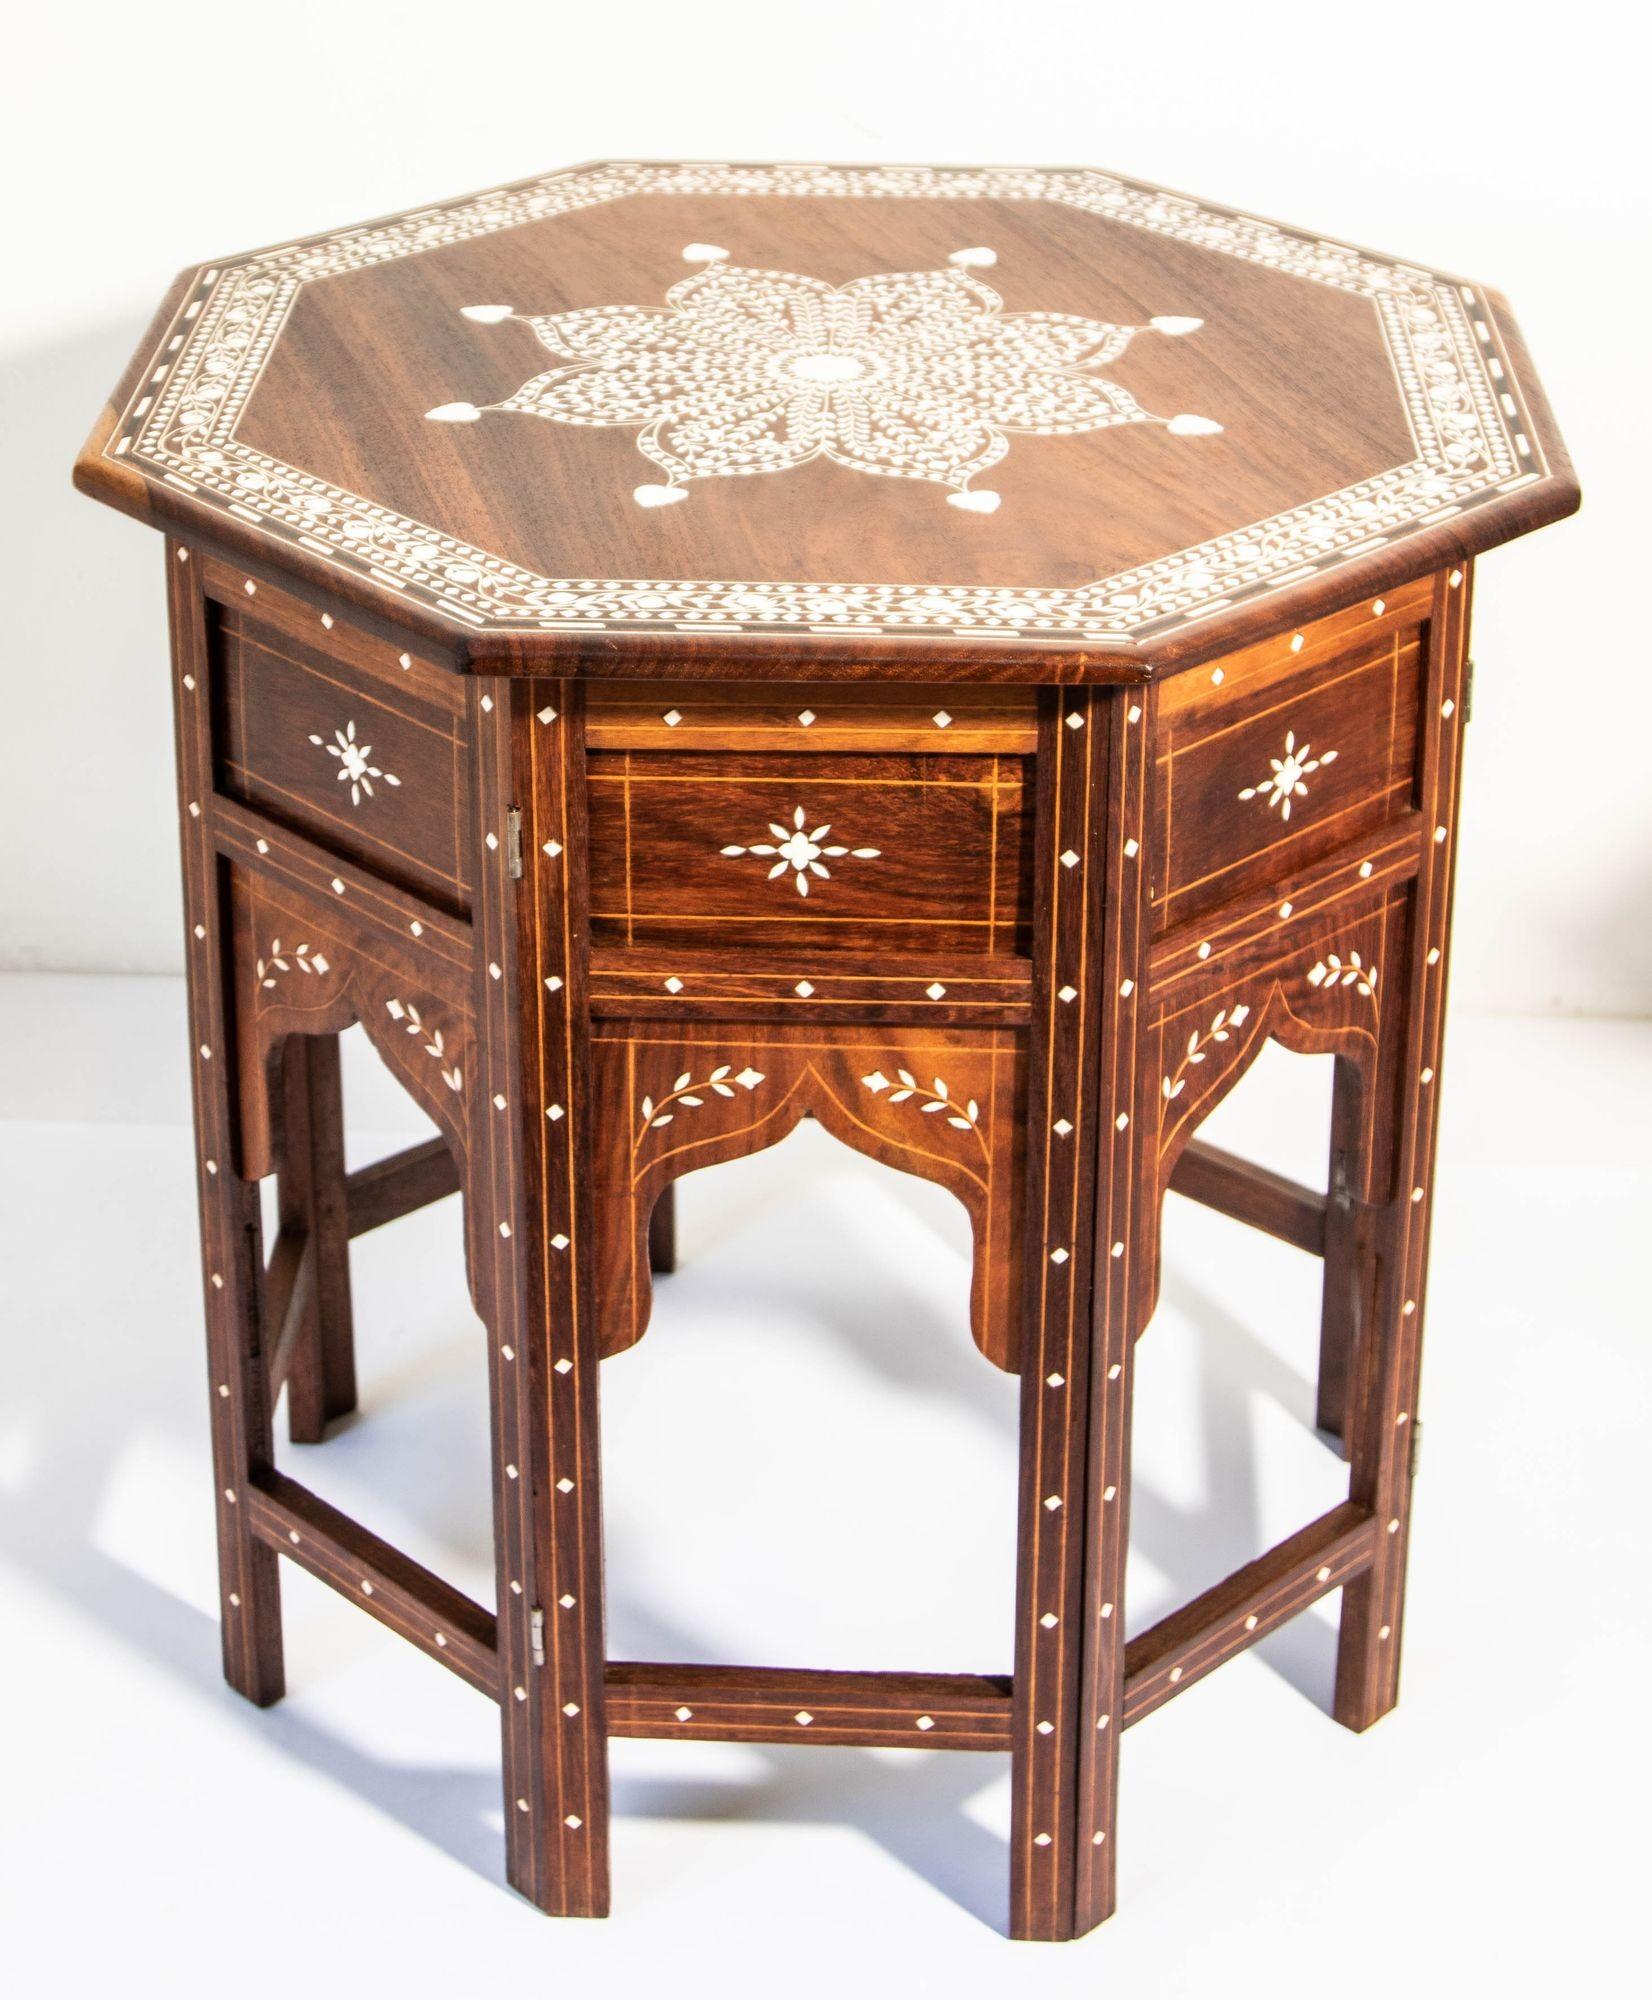 1950s Large and Intricately Bone Inlaid Anglo Indian Octagonal Side Table.
Originally used as traveling tea tables for the British in India, the octagonal top with central medallion surrounded stylized foliate designs within a border of meandering